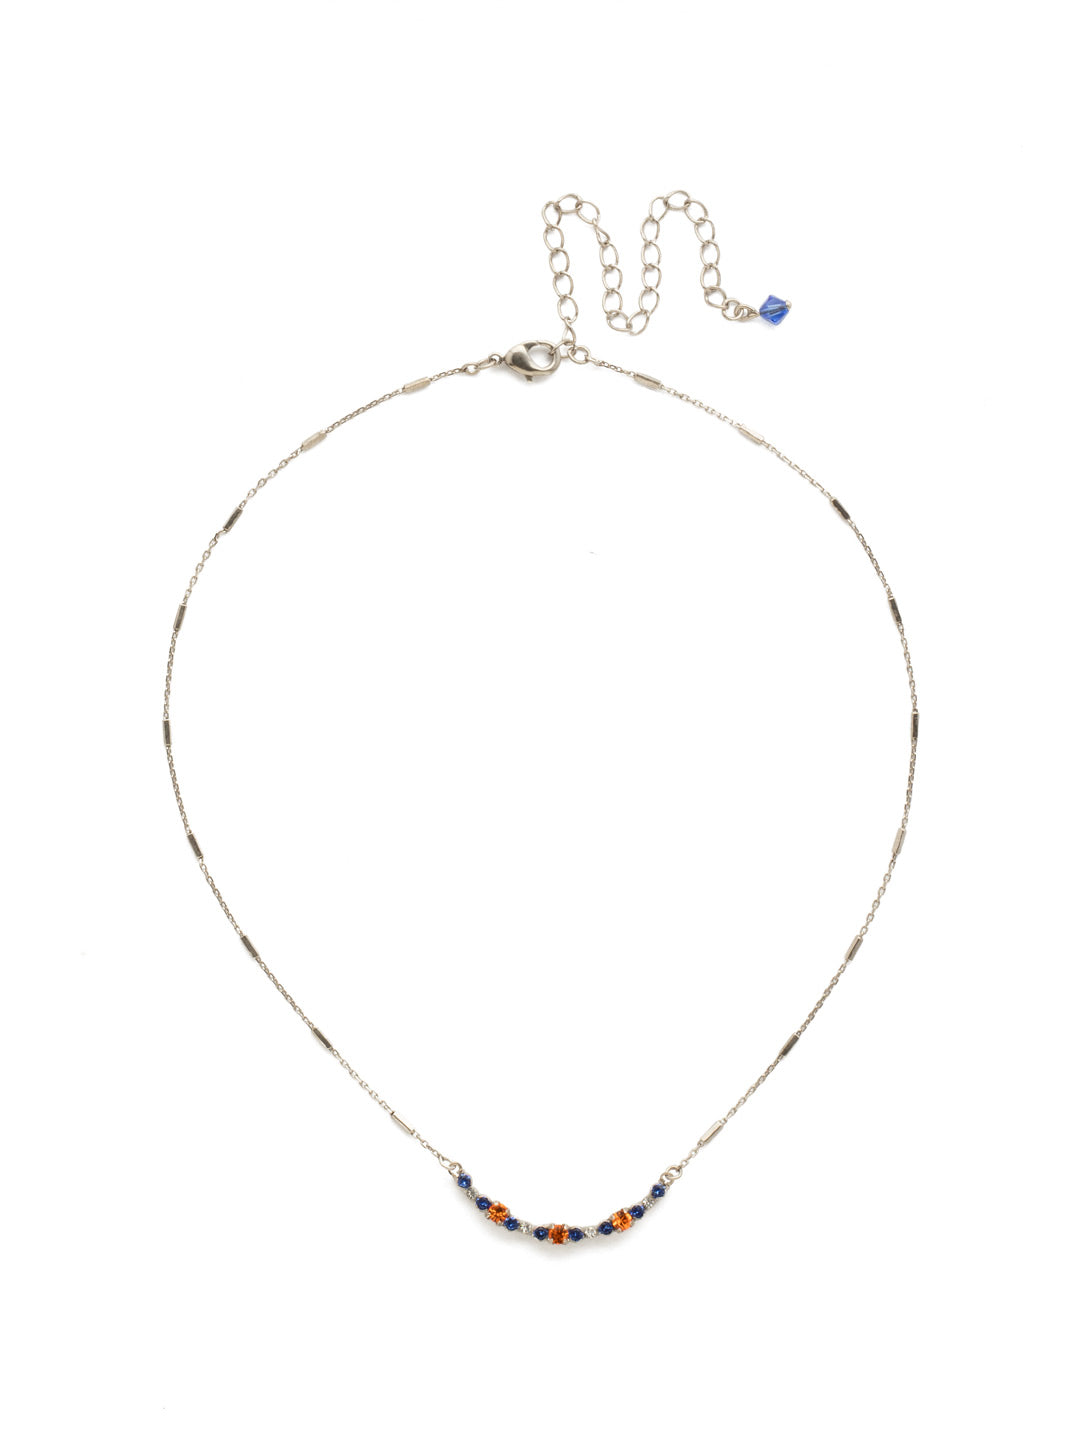 The Skinny Mini Necklace - NDU46ASOCR - <p>Petite round crystals in a variety of settings form a subtle arc highlighted with a delicate embellished chain. From Sorrelli's Orange Crush collection in our Antique Silver-tone finish.</p>